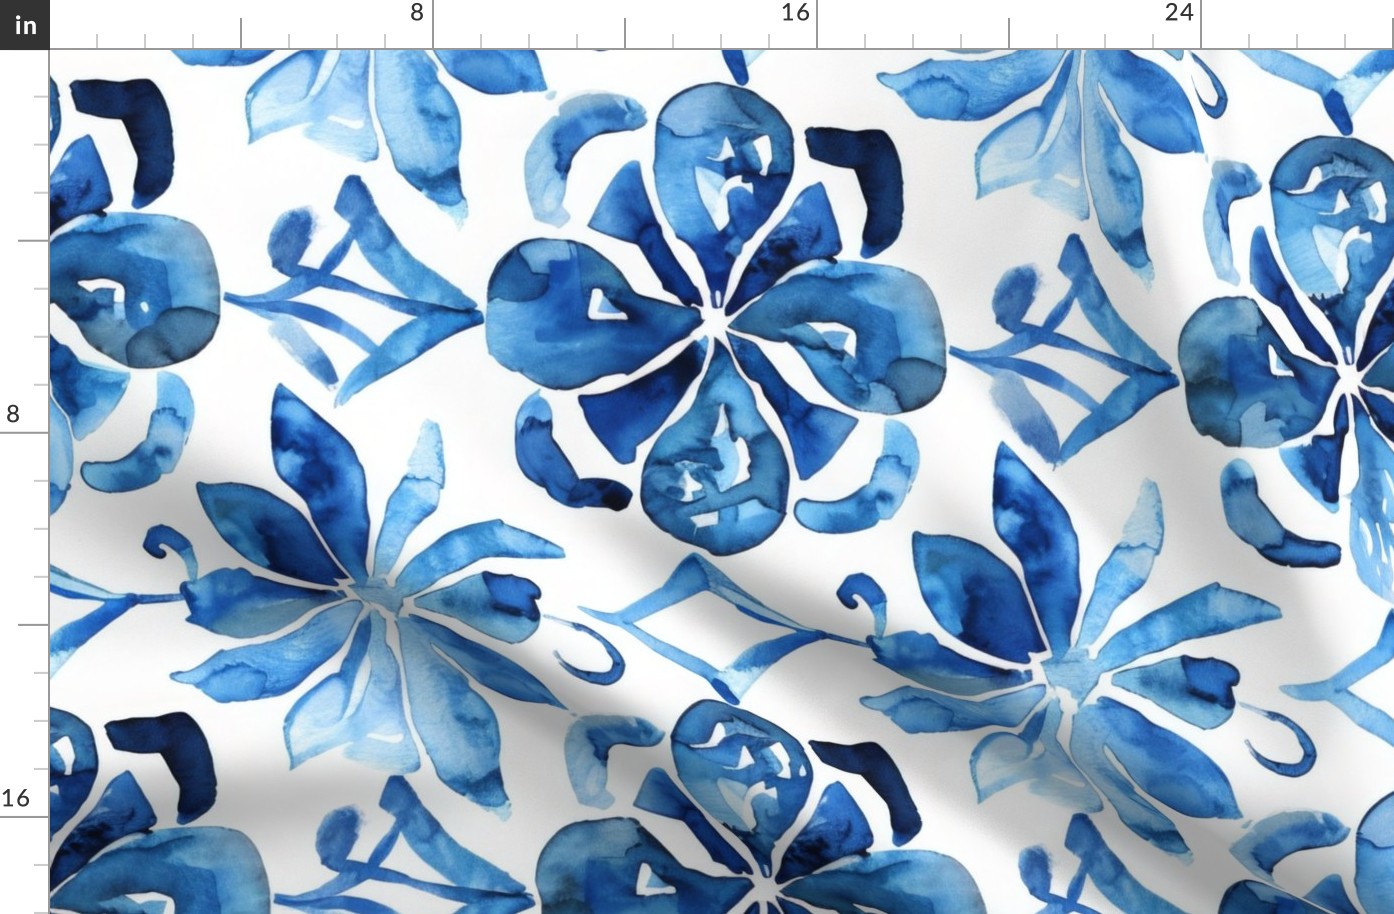 Tile 3: Classic Greek Watercolour Tile Design in Blue and White